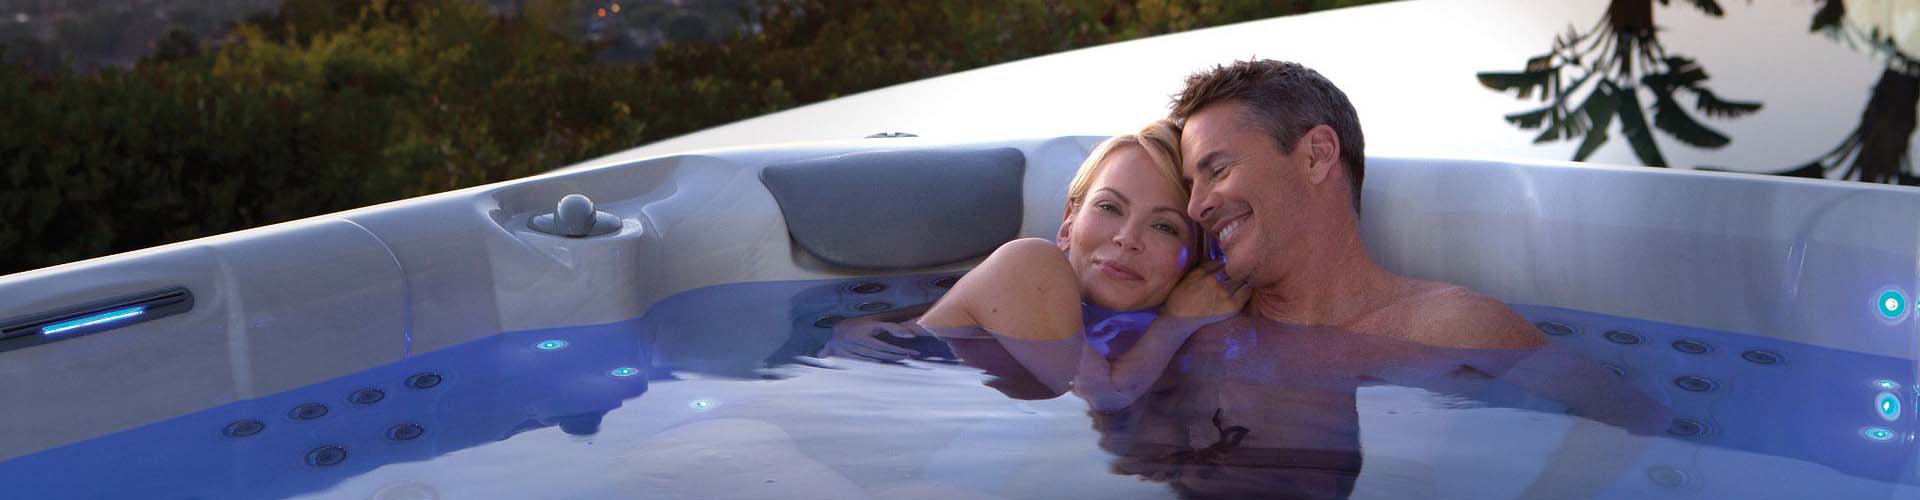 Tips for Your Next Hot Tub Date Night